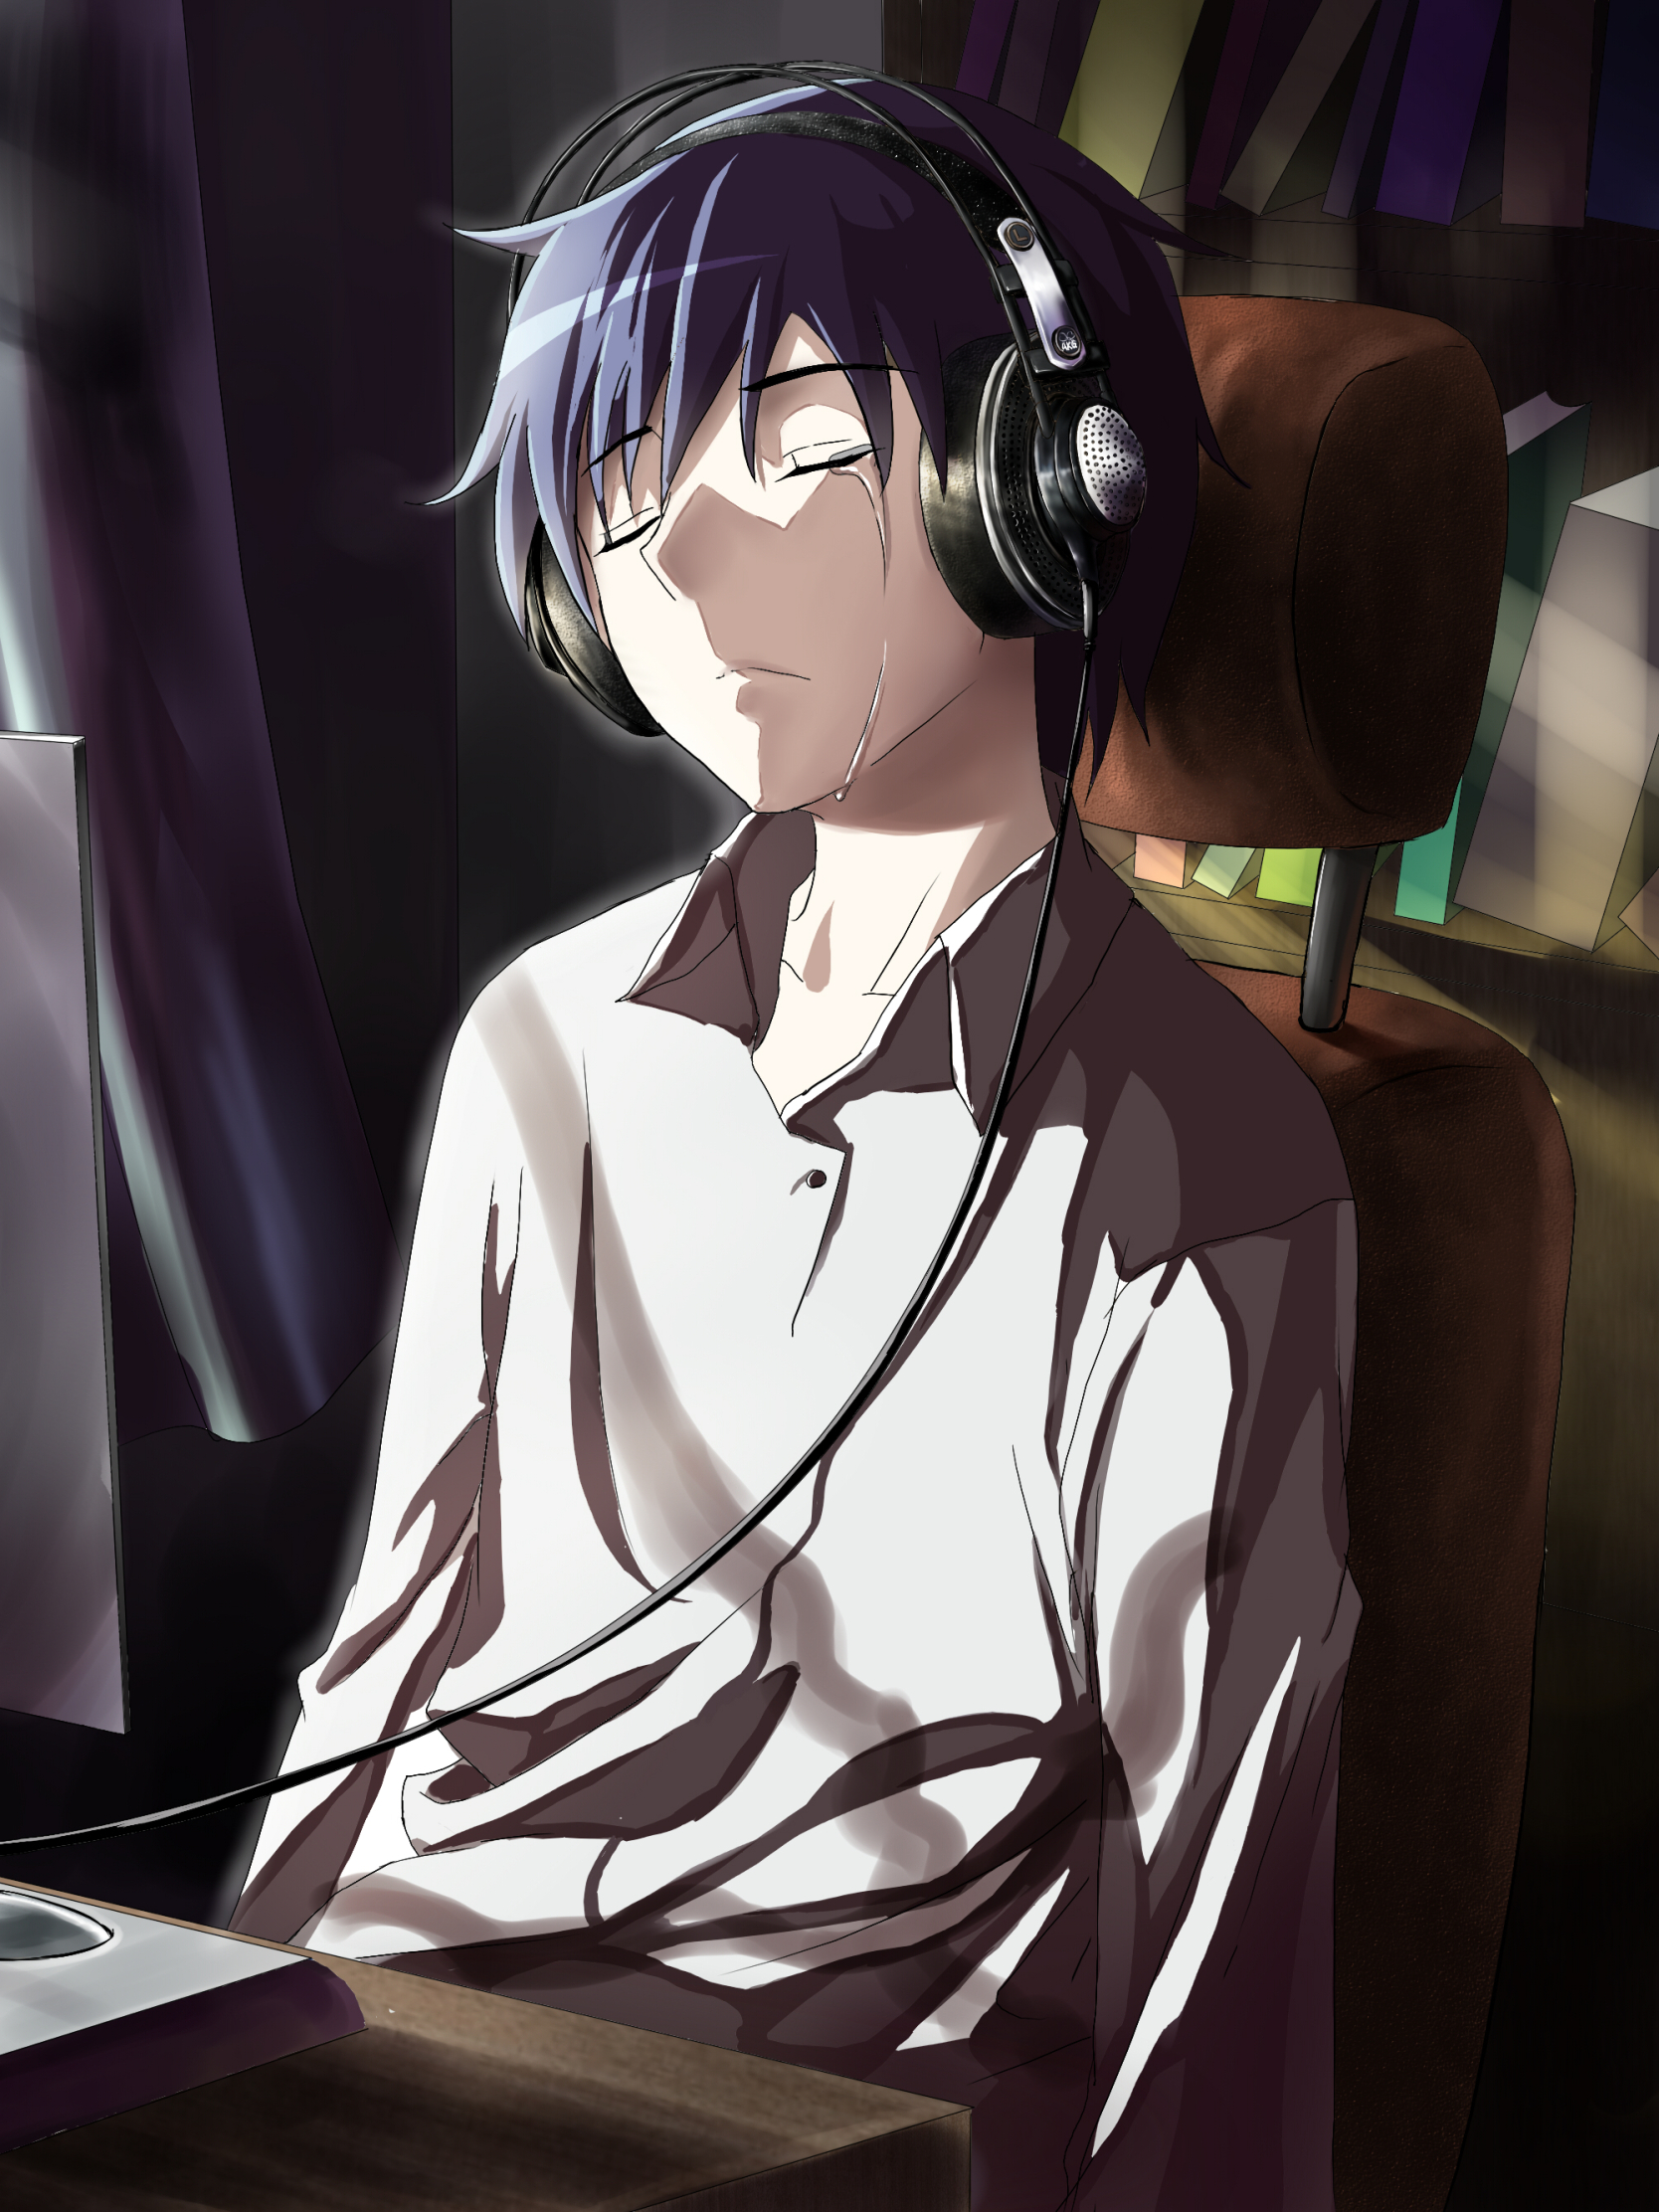 anime girl wearing headphone listening to amplifier | Stable Diffusion